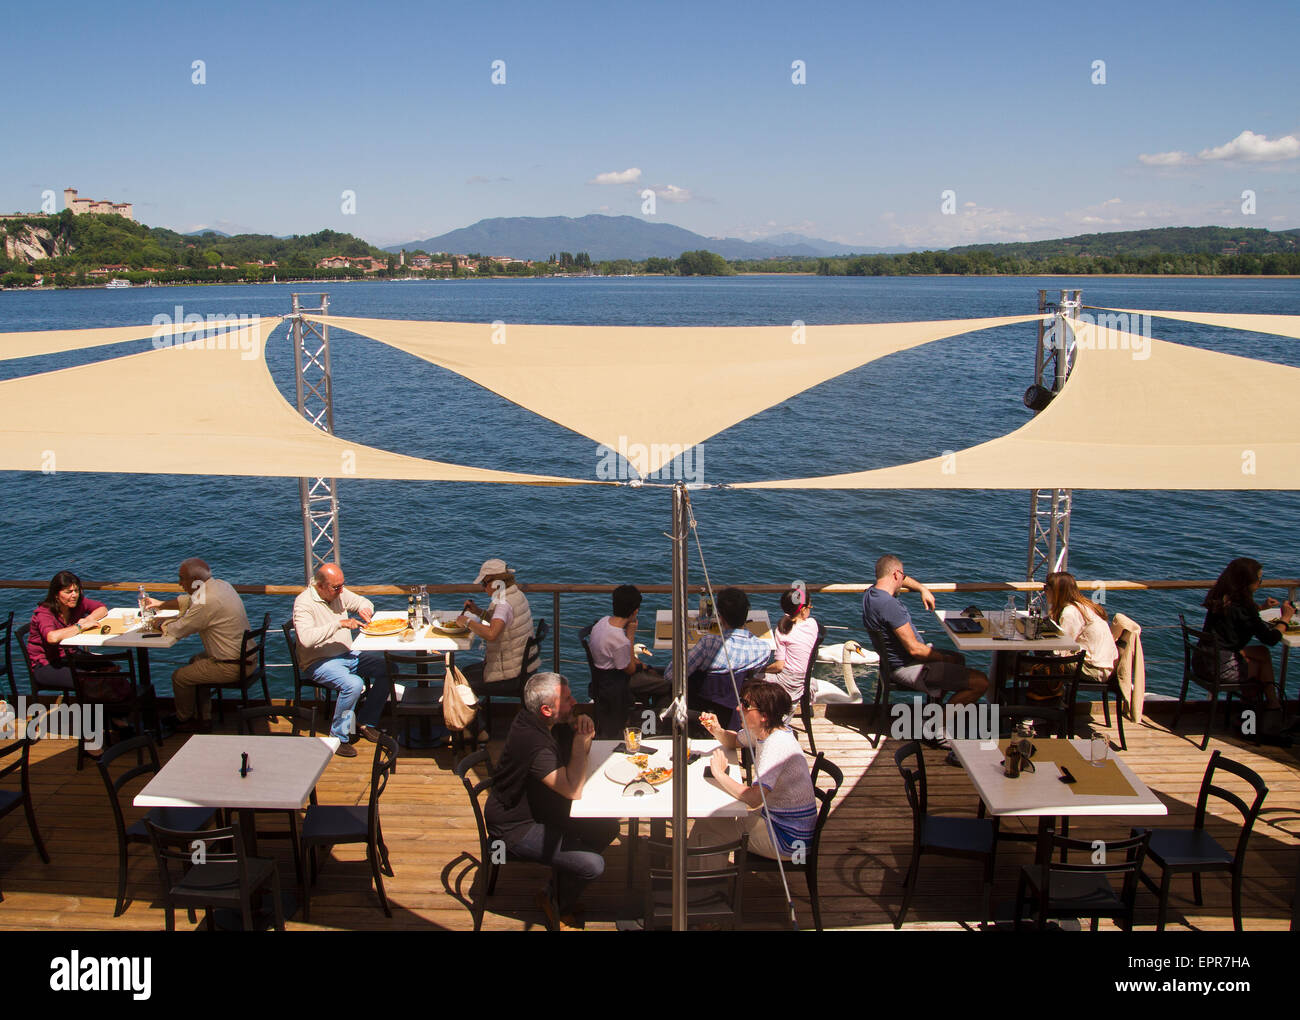 diners eating at a lakeside restaurant in Arona, lake Maggiore, Italy Stock Photo